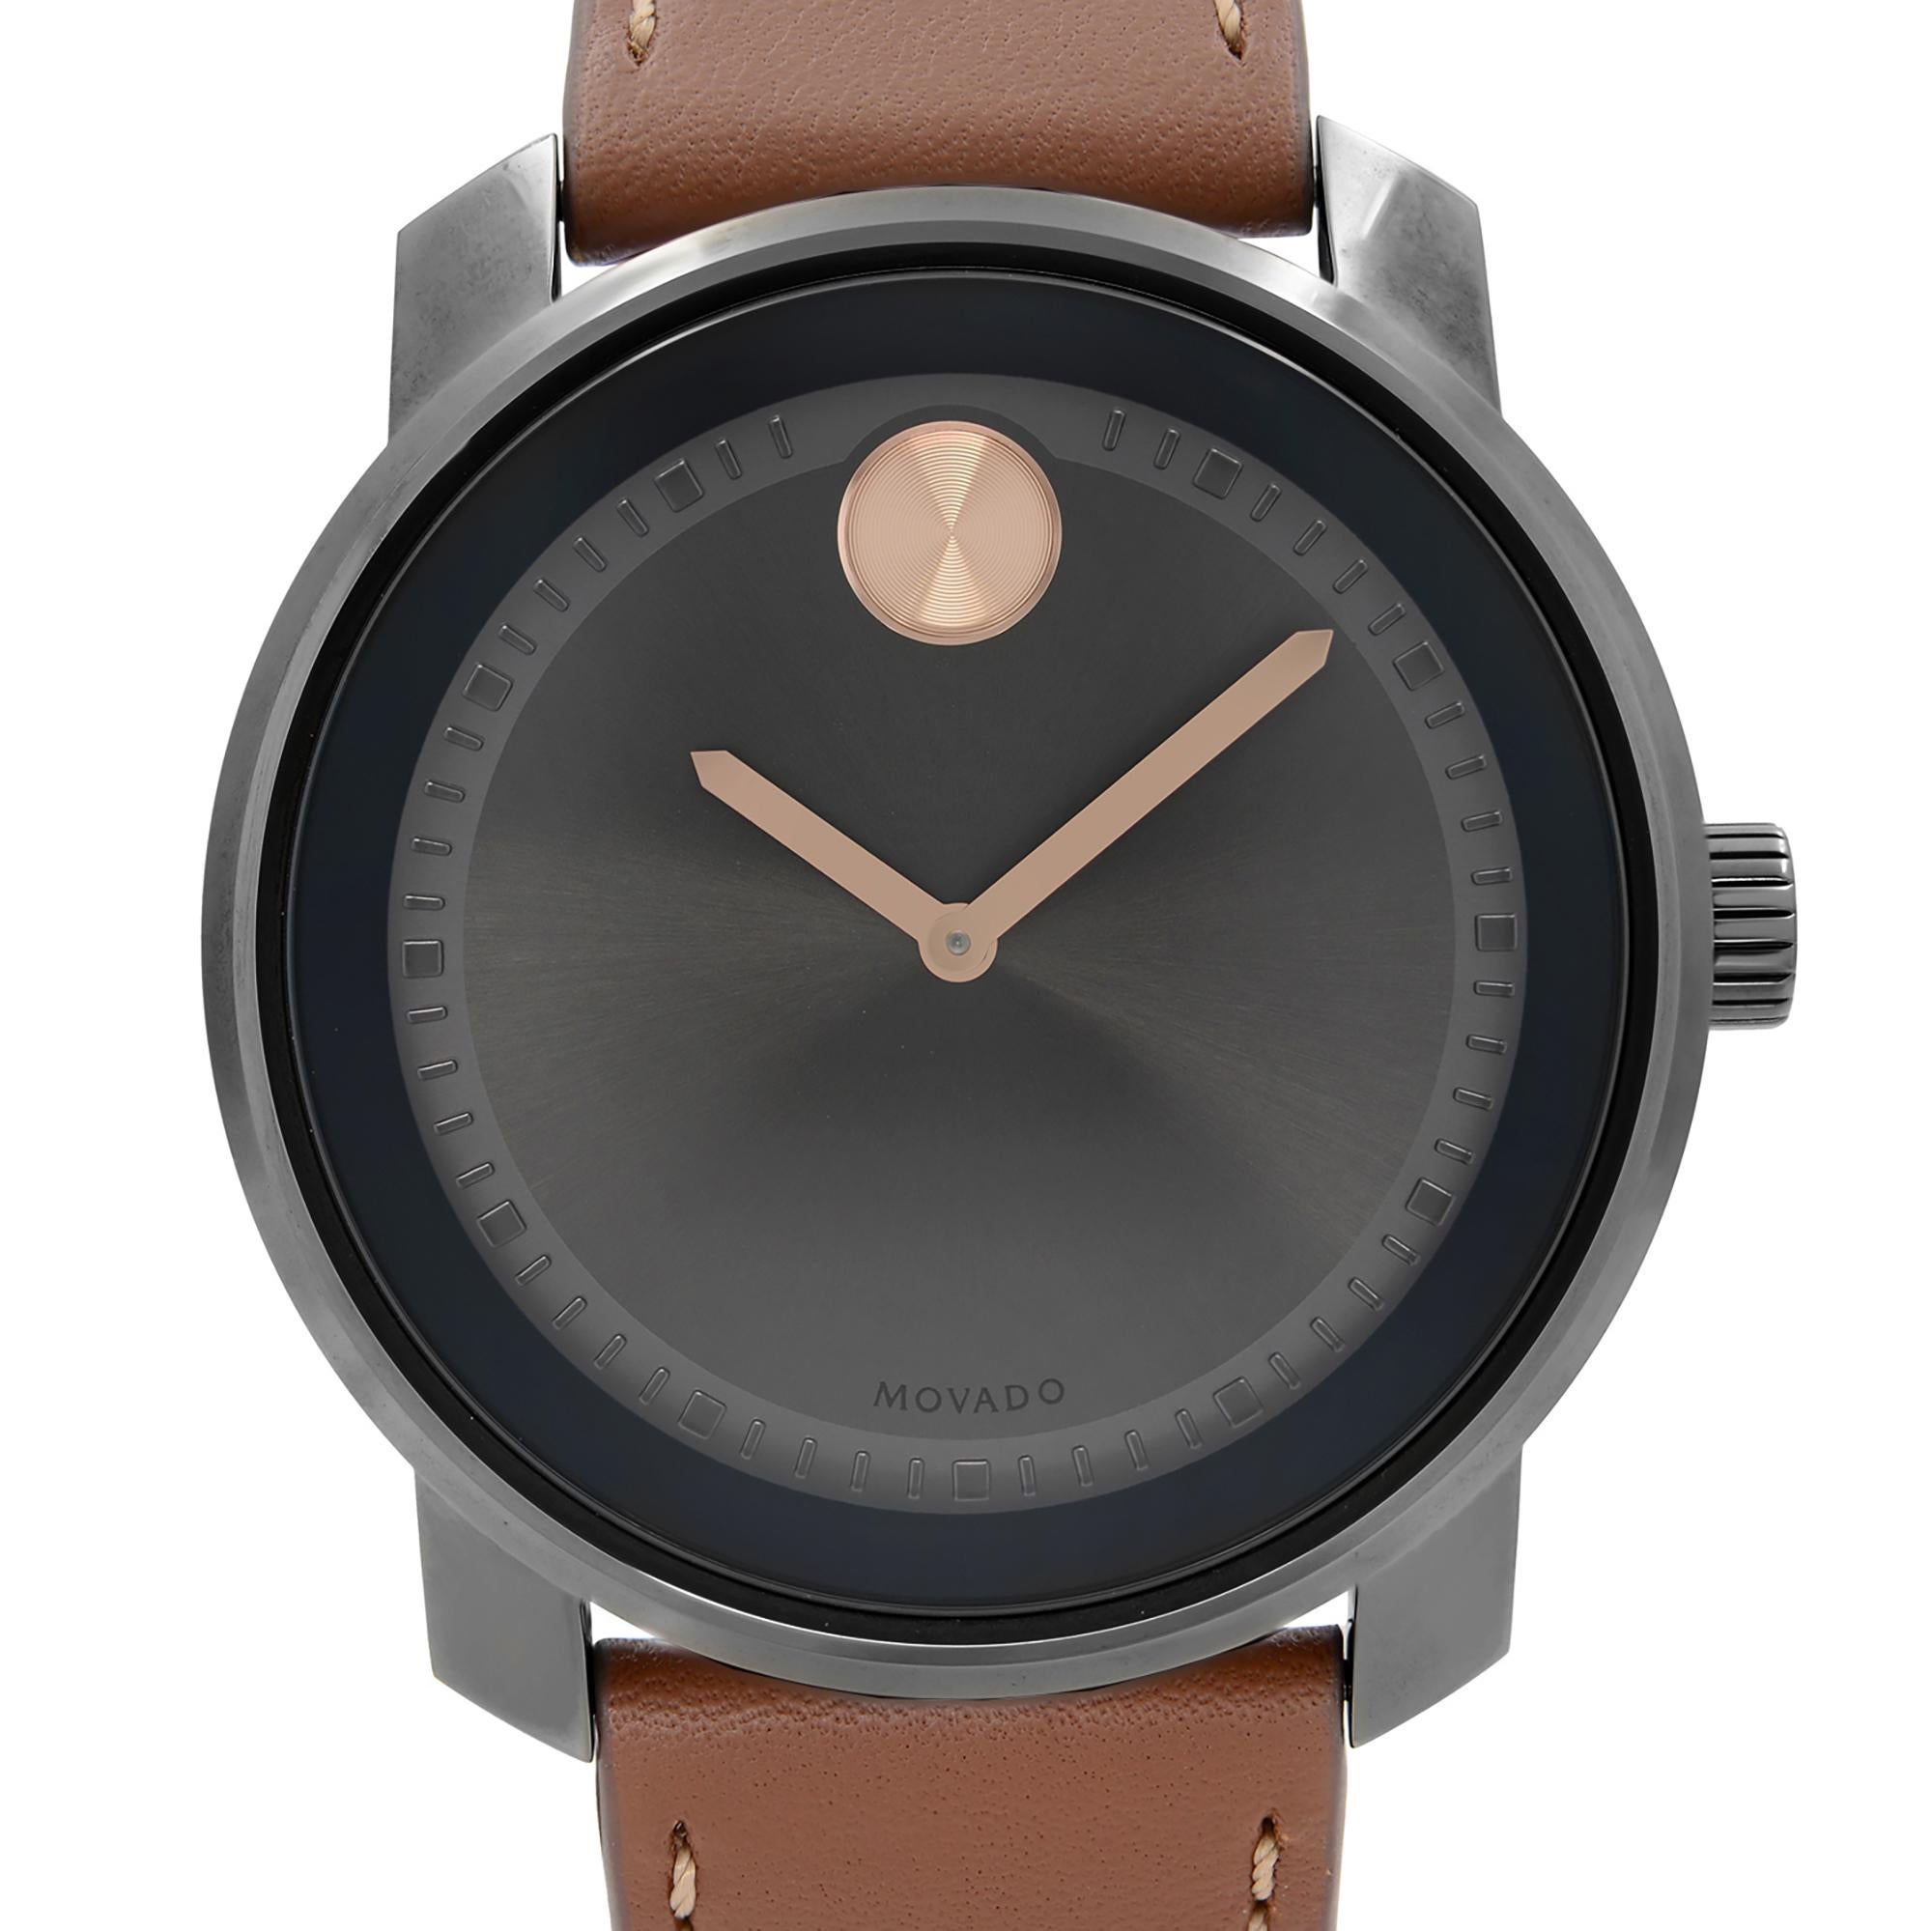 New with defects Movado Bold 42.5 mm Gunmetal Stainless Steel Grey Dial Quartz Men's Watch 3600378. The timepiece Has never been worn or owned but has minor Imperfections on the Inner Side of the Band Due to Storing and Handling. Original Movado Box